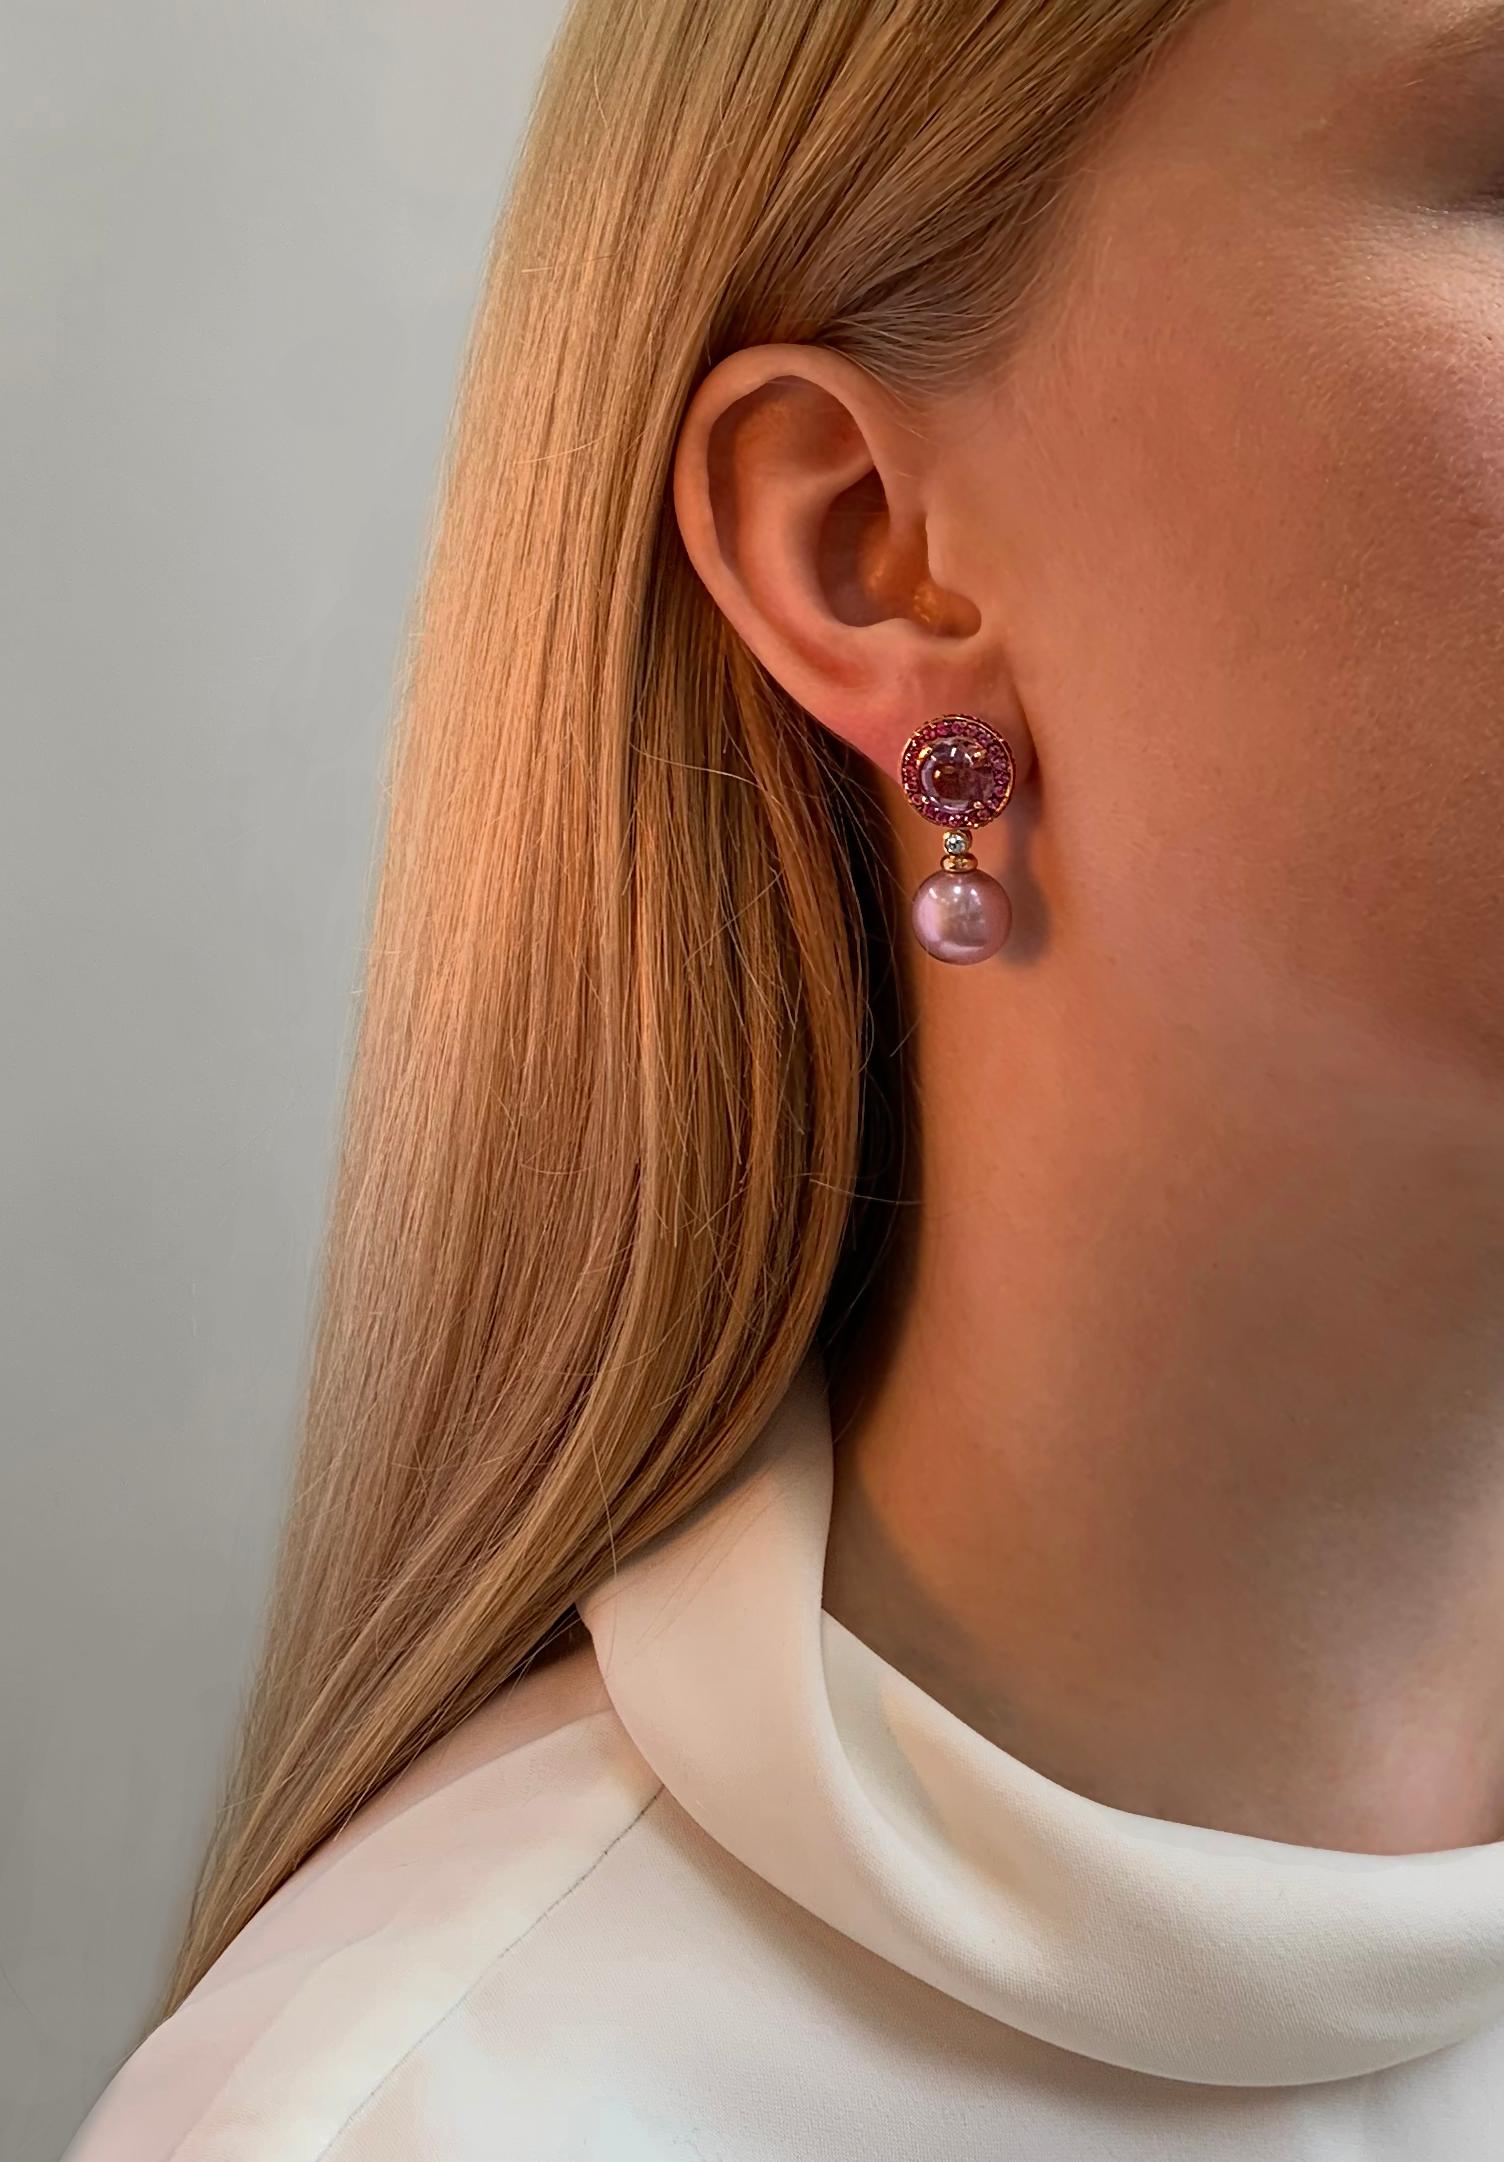 These sumptuous earrings by Yoko London feature lustrous Freshwater pearls, suspended beneath a mesmerising combination of Amethysts and purple sapphires. The 18 Karat Rose Gold setting serves to enrich the captivating hues of the pearls, amethysts